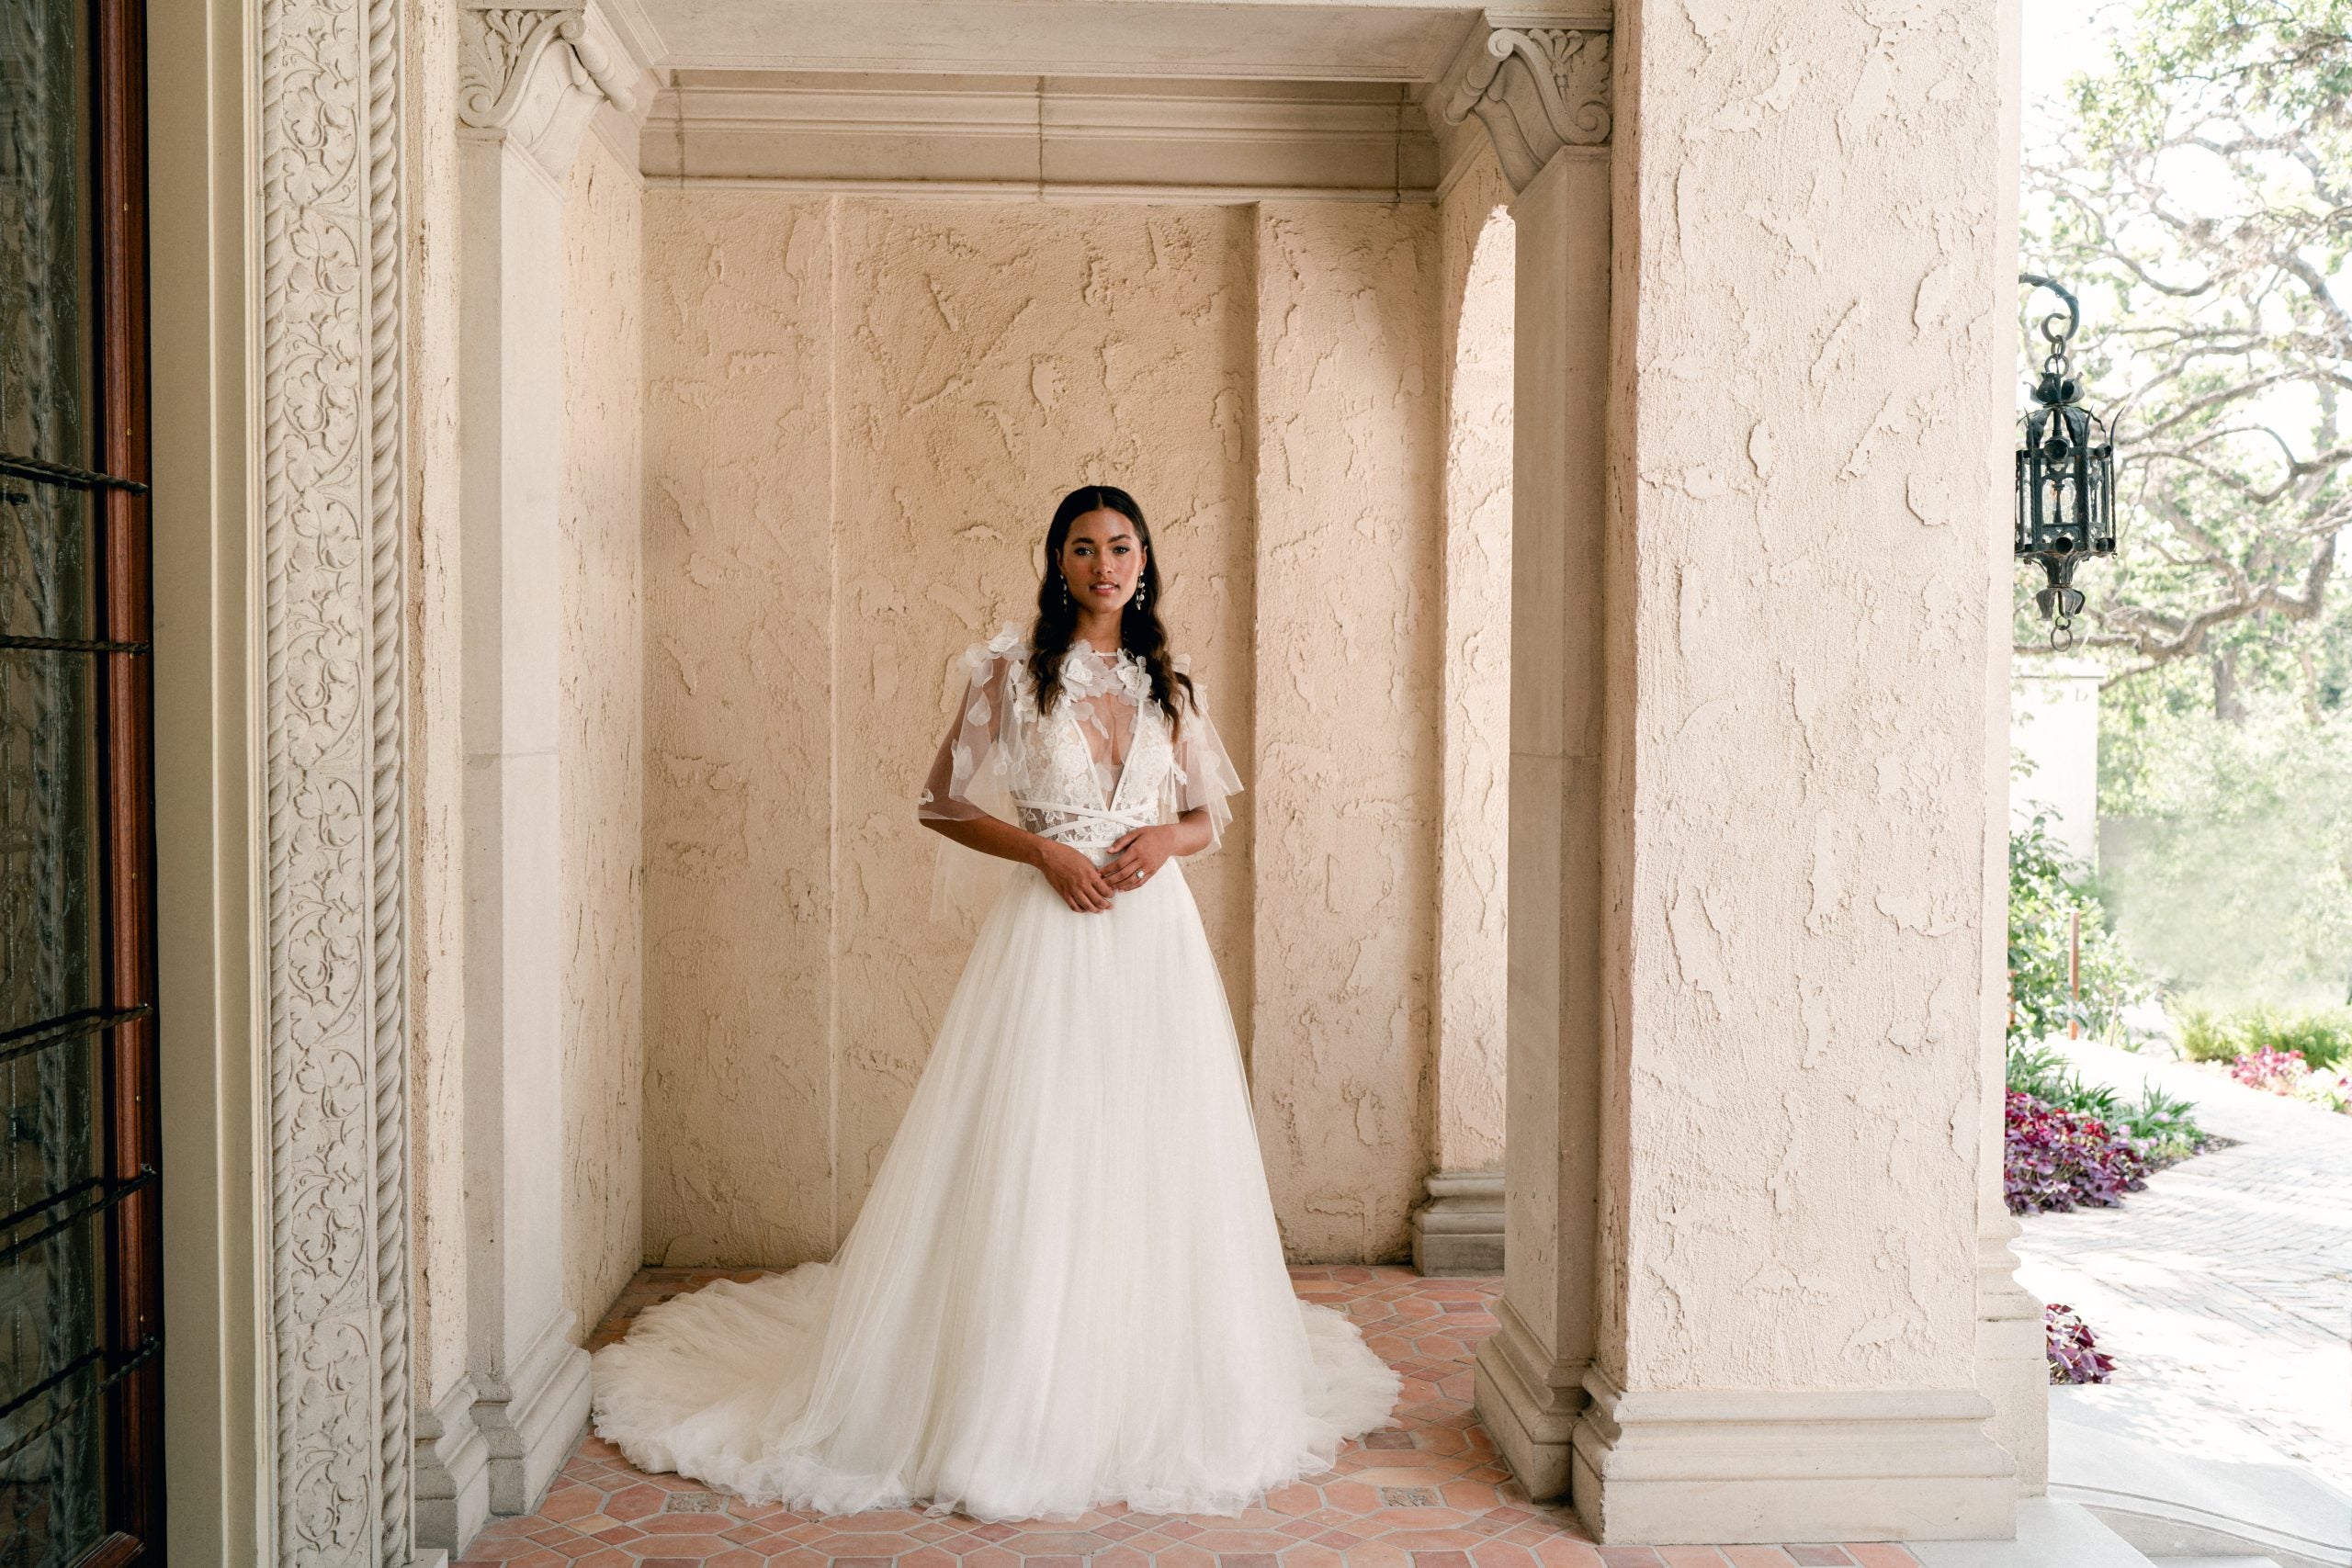 Western wedding gown inspiration — Kate's Bridal Cottage